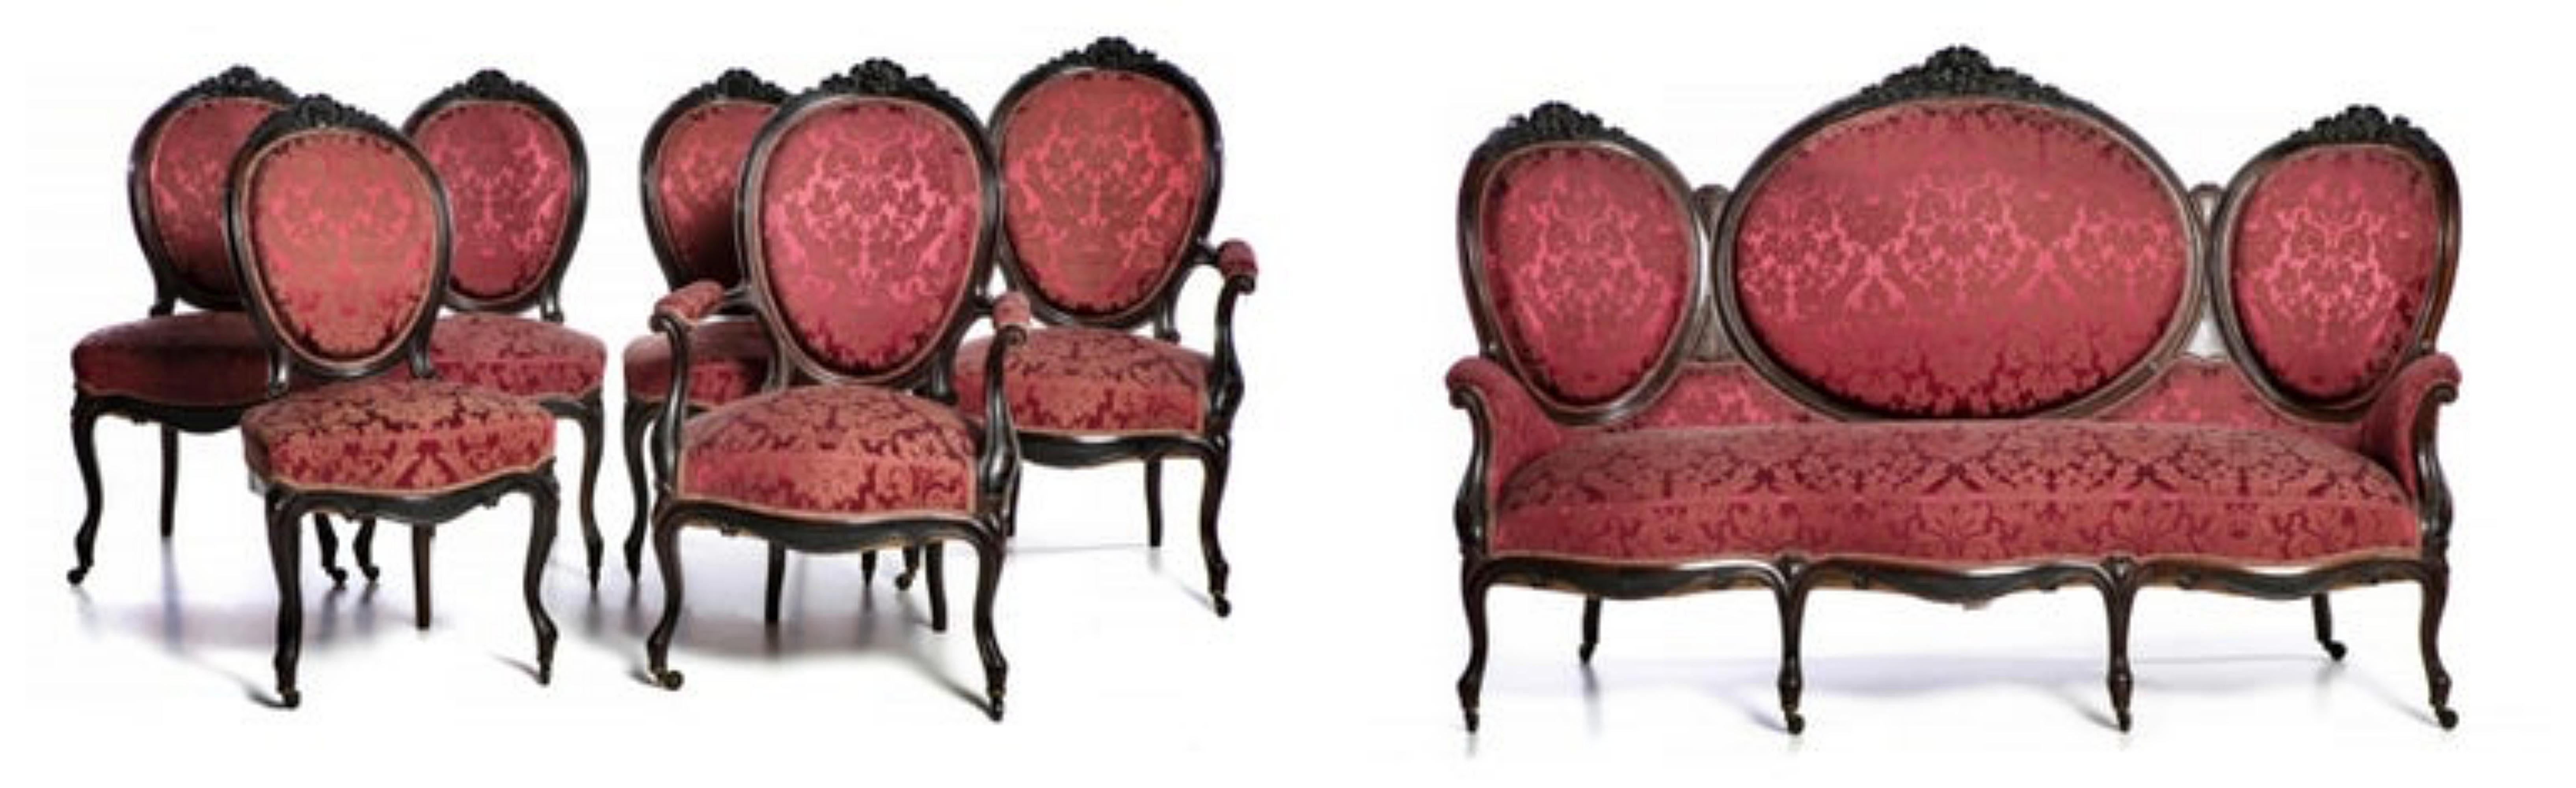 Canape set two armchairs and four chairs.

Portuguese 19th century.
romantic style, in rosewood wood.
Seat and back in damask.
Dim.: (canapé) 120 x 178 x 56 cm.
Good condition.